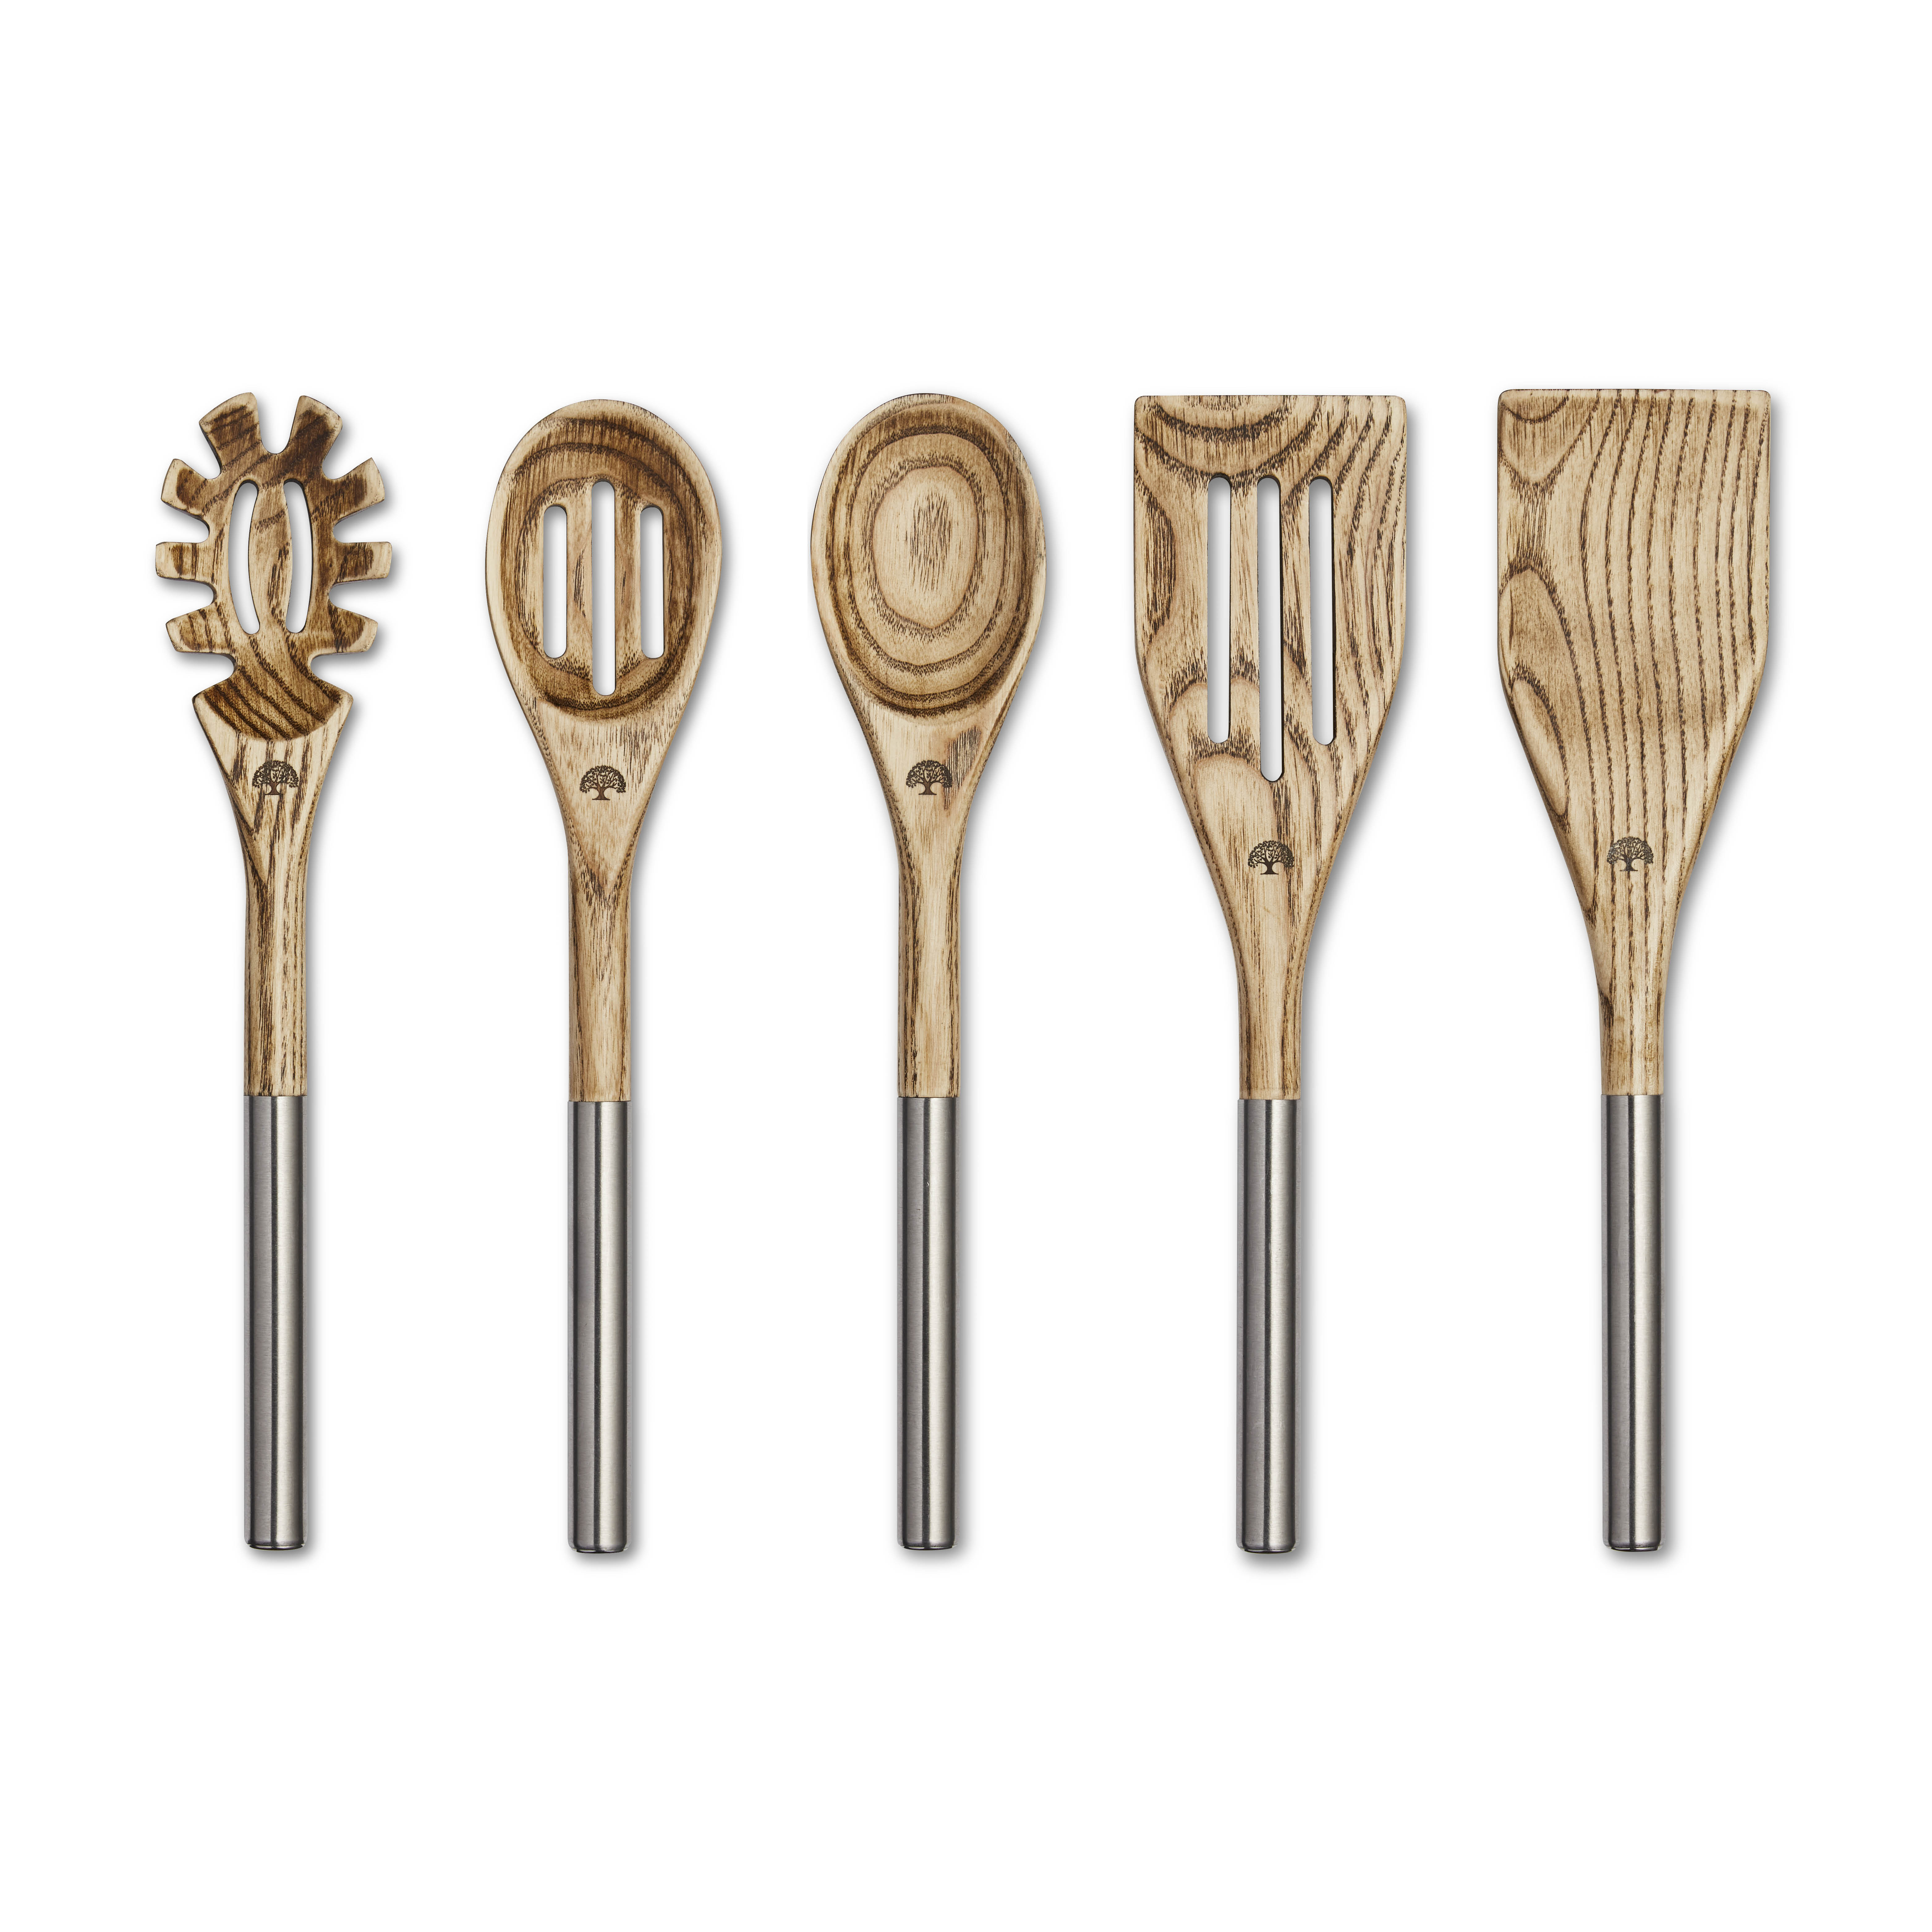 5 Piece Utensil Set, Ash Wood With Stainless Steel Accents